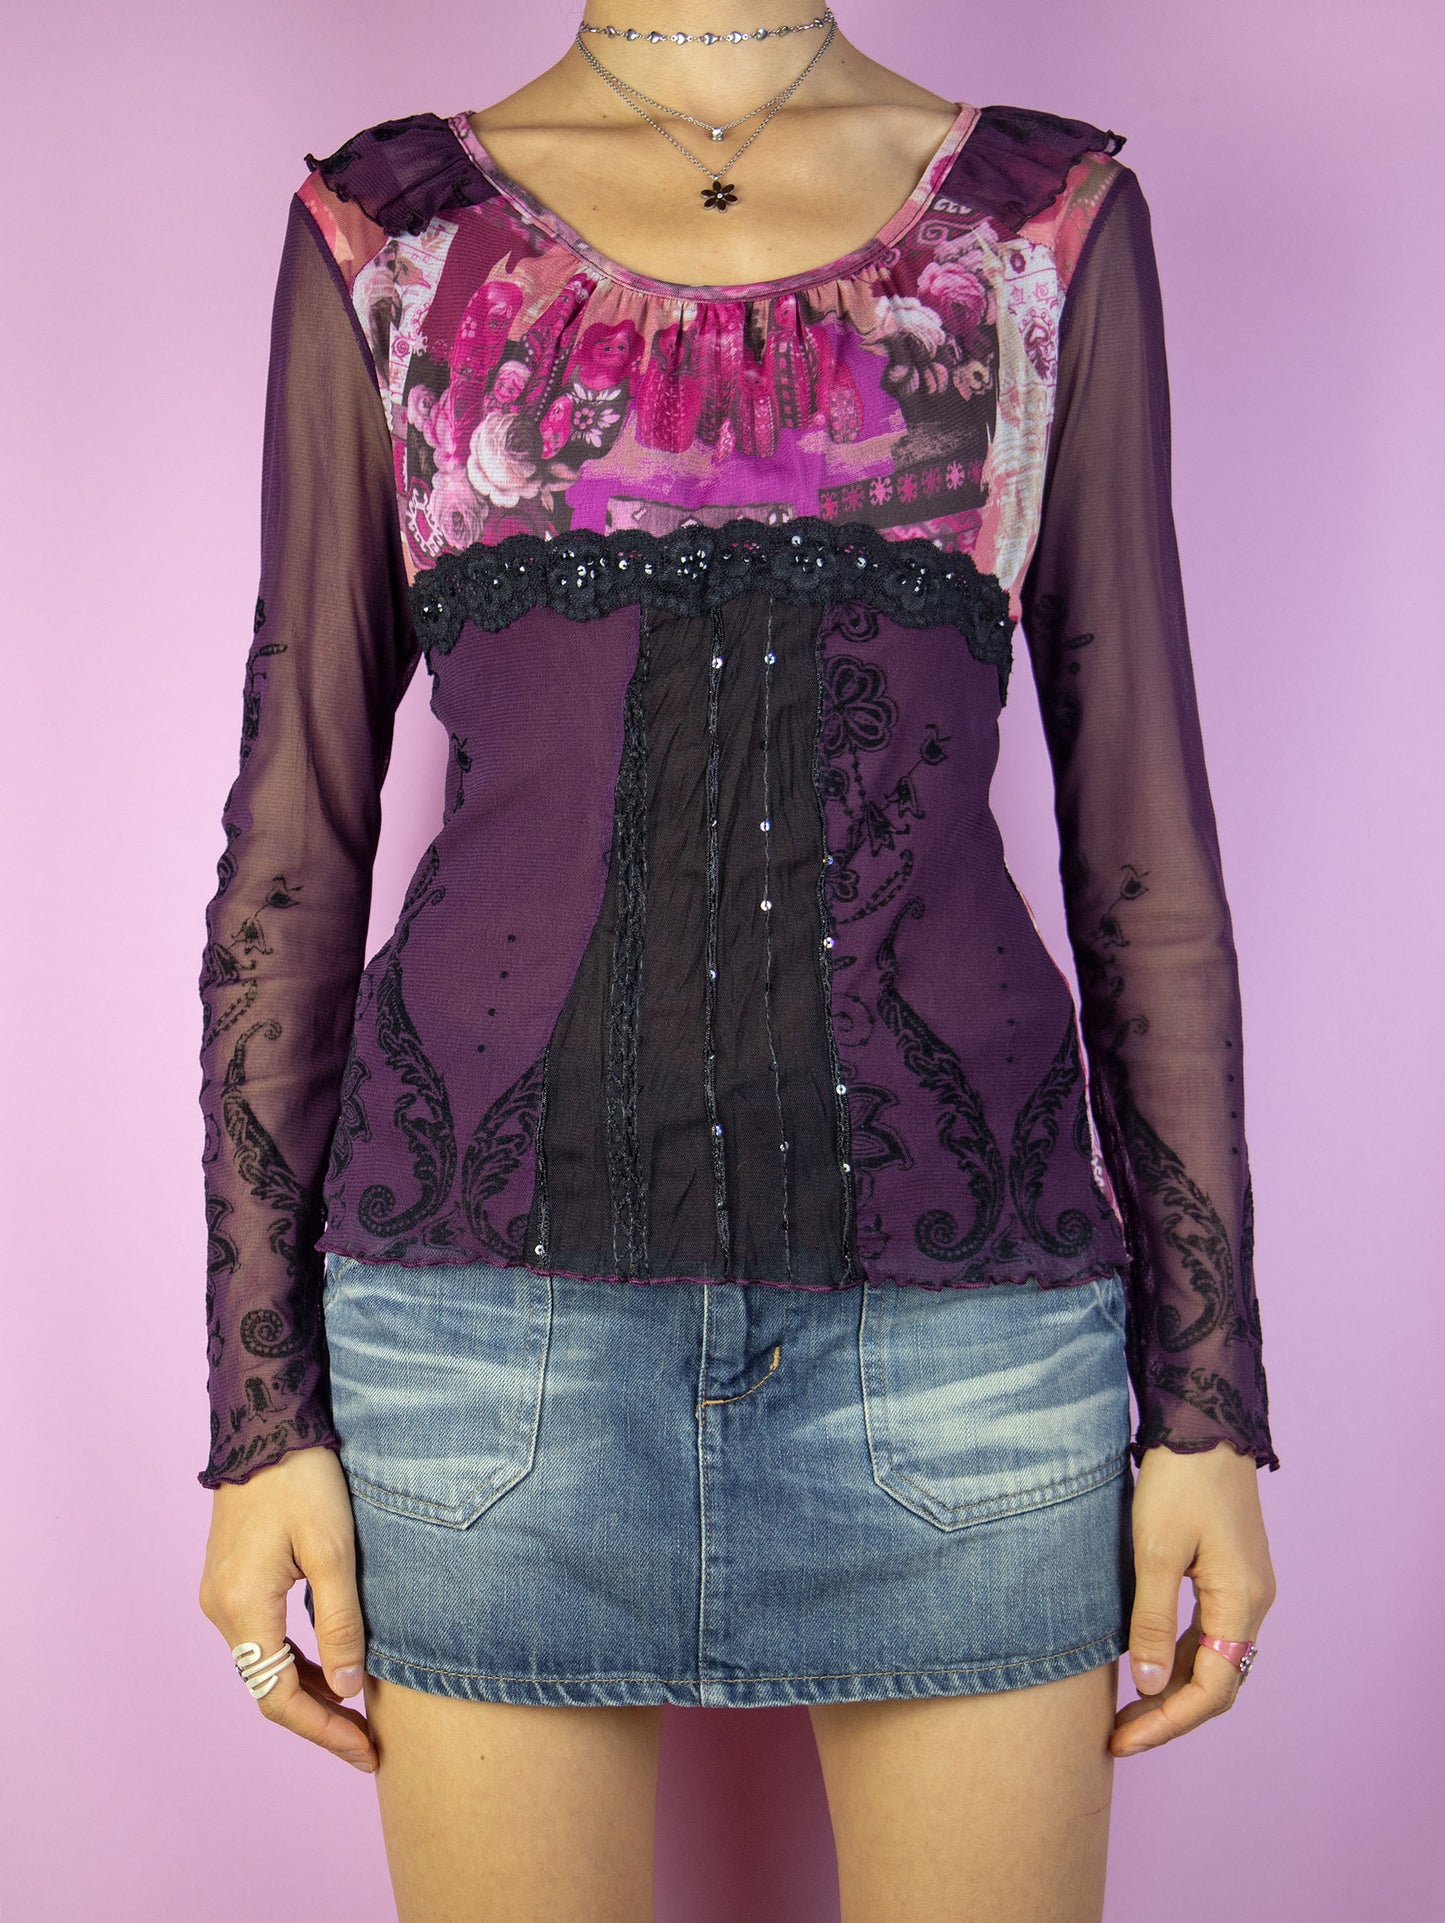 The Y2K Graphic Purple Mesh Top is a vintage dark purple and pink abstract floral semi-sheer mesh long-sleeve top with ruffles, black lace detailing, and lettuce hem. Cyber fairy grunge 2000s shirt.